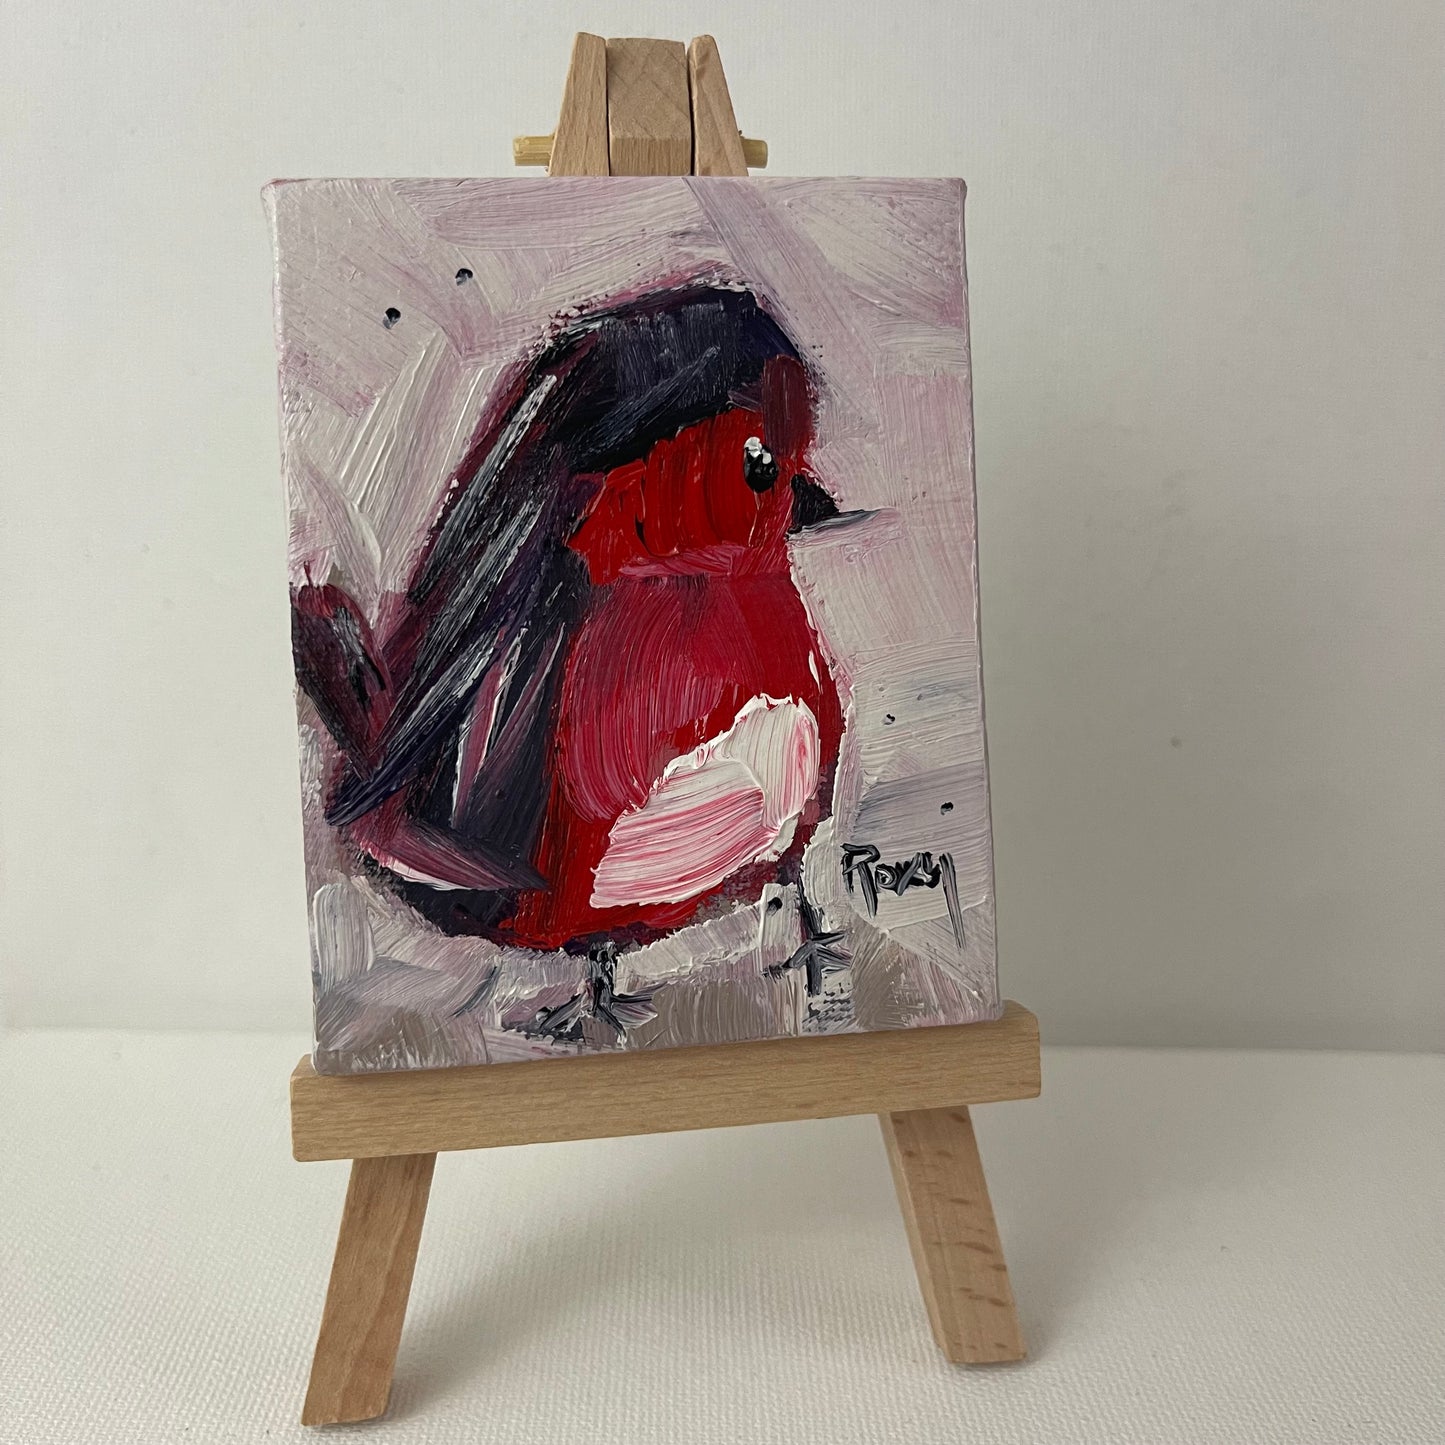 Adorable Red Robin Chick-Original Miniature Oil Painting with Stand